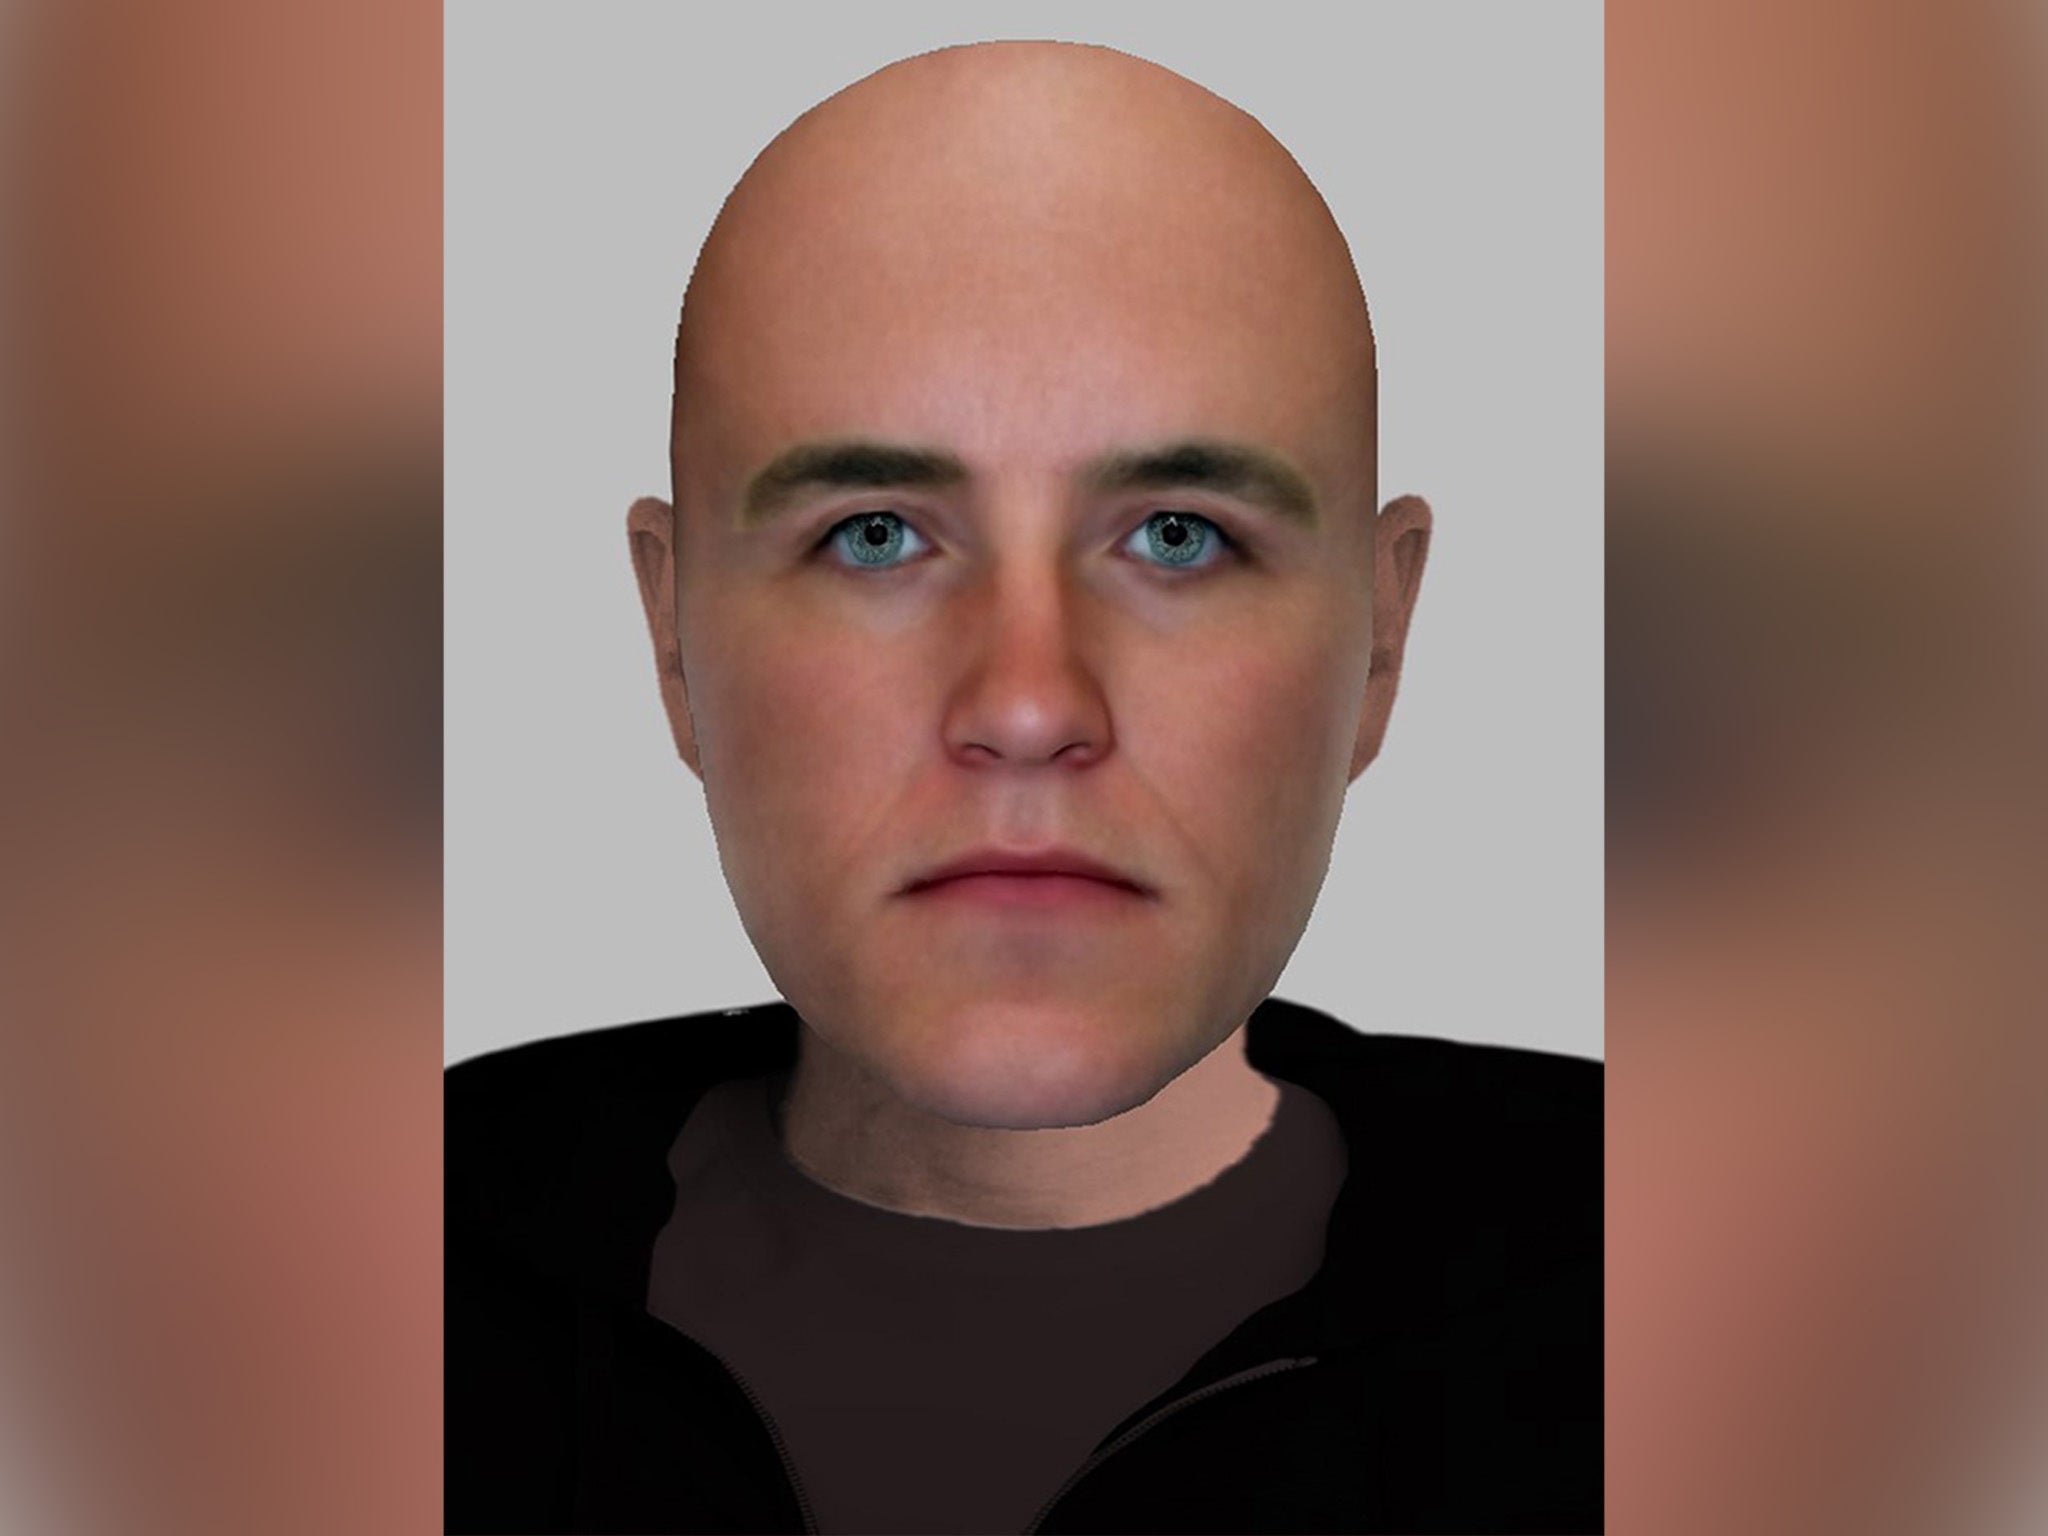 The police have released an e-fit of a man in roller skates indecently exposing himself to lone women on several occasions